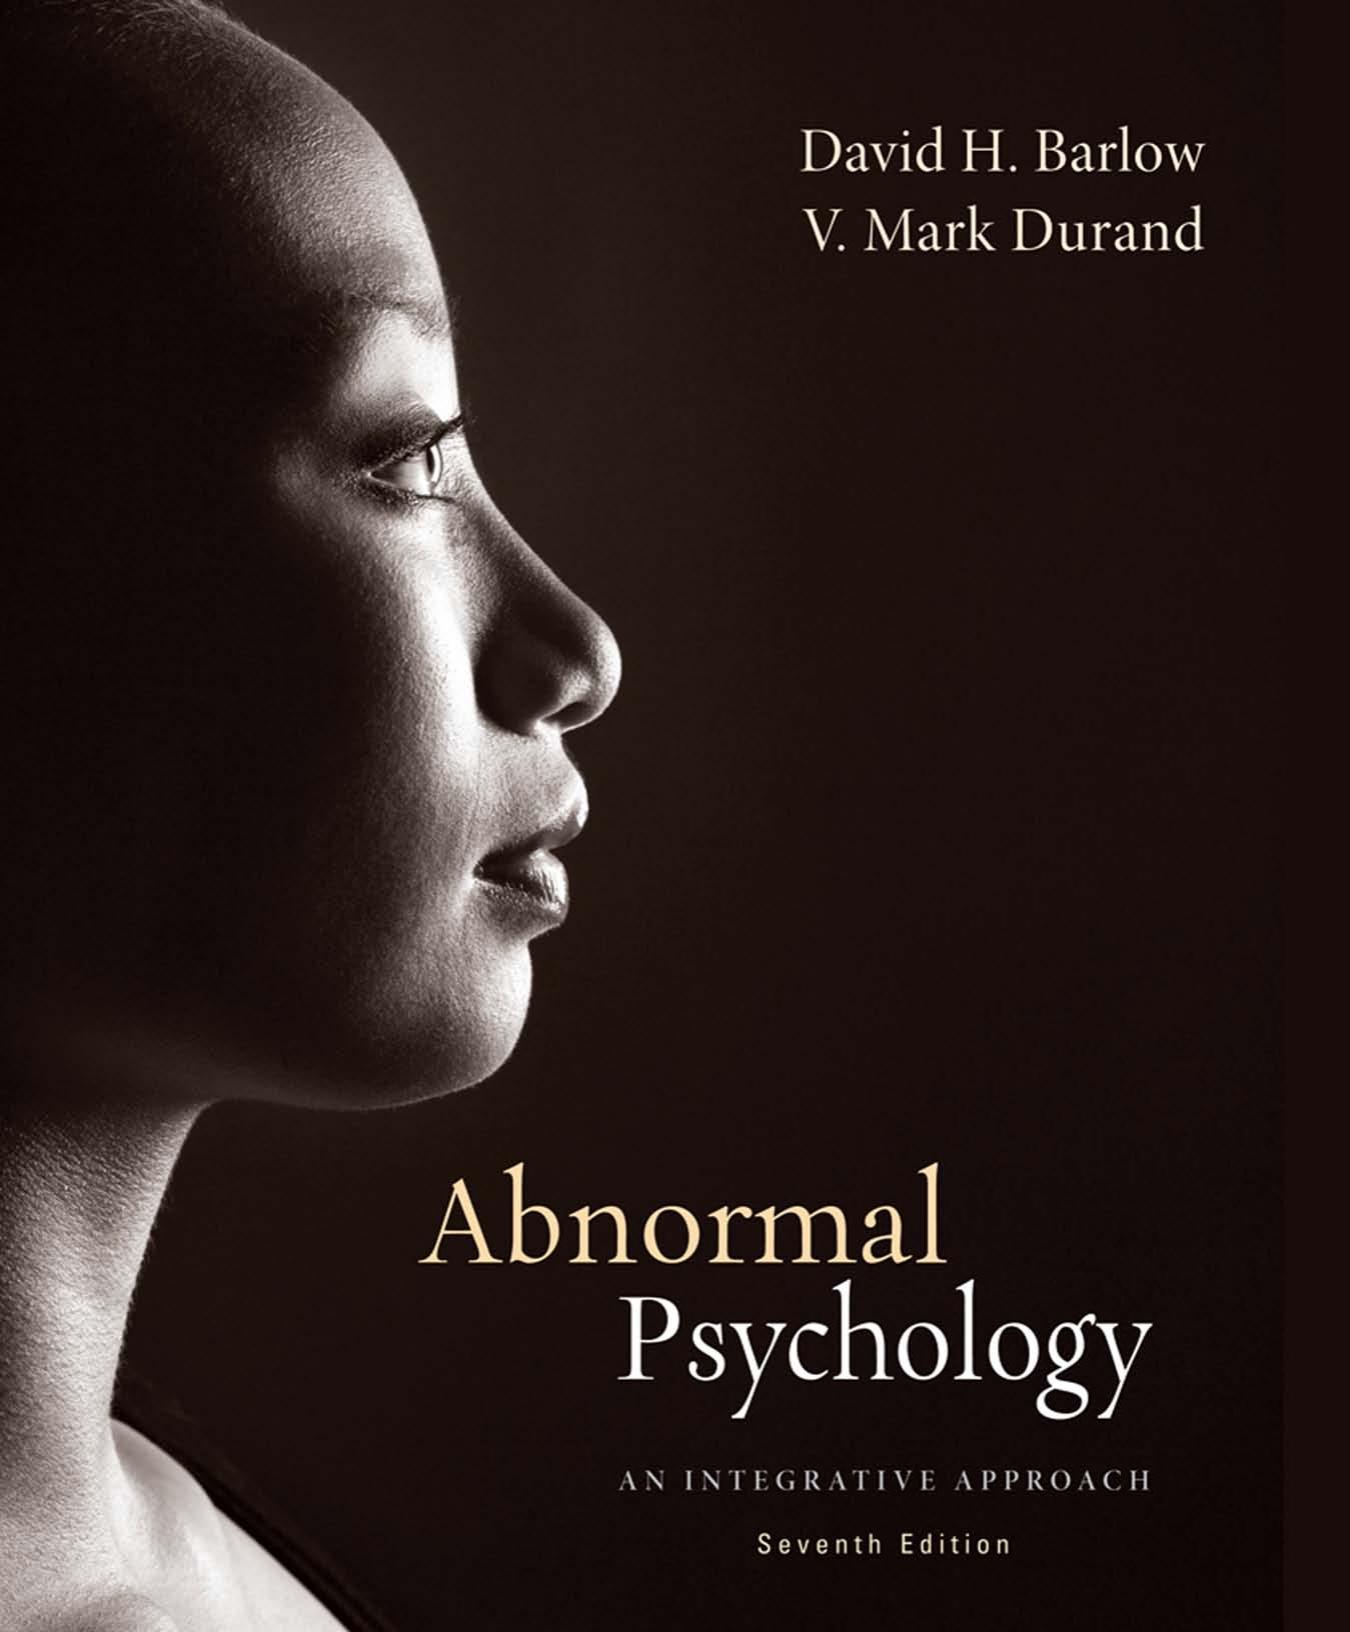 Abnormal Psychology: An Integrative Approach, 7th ed.